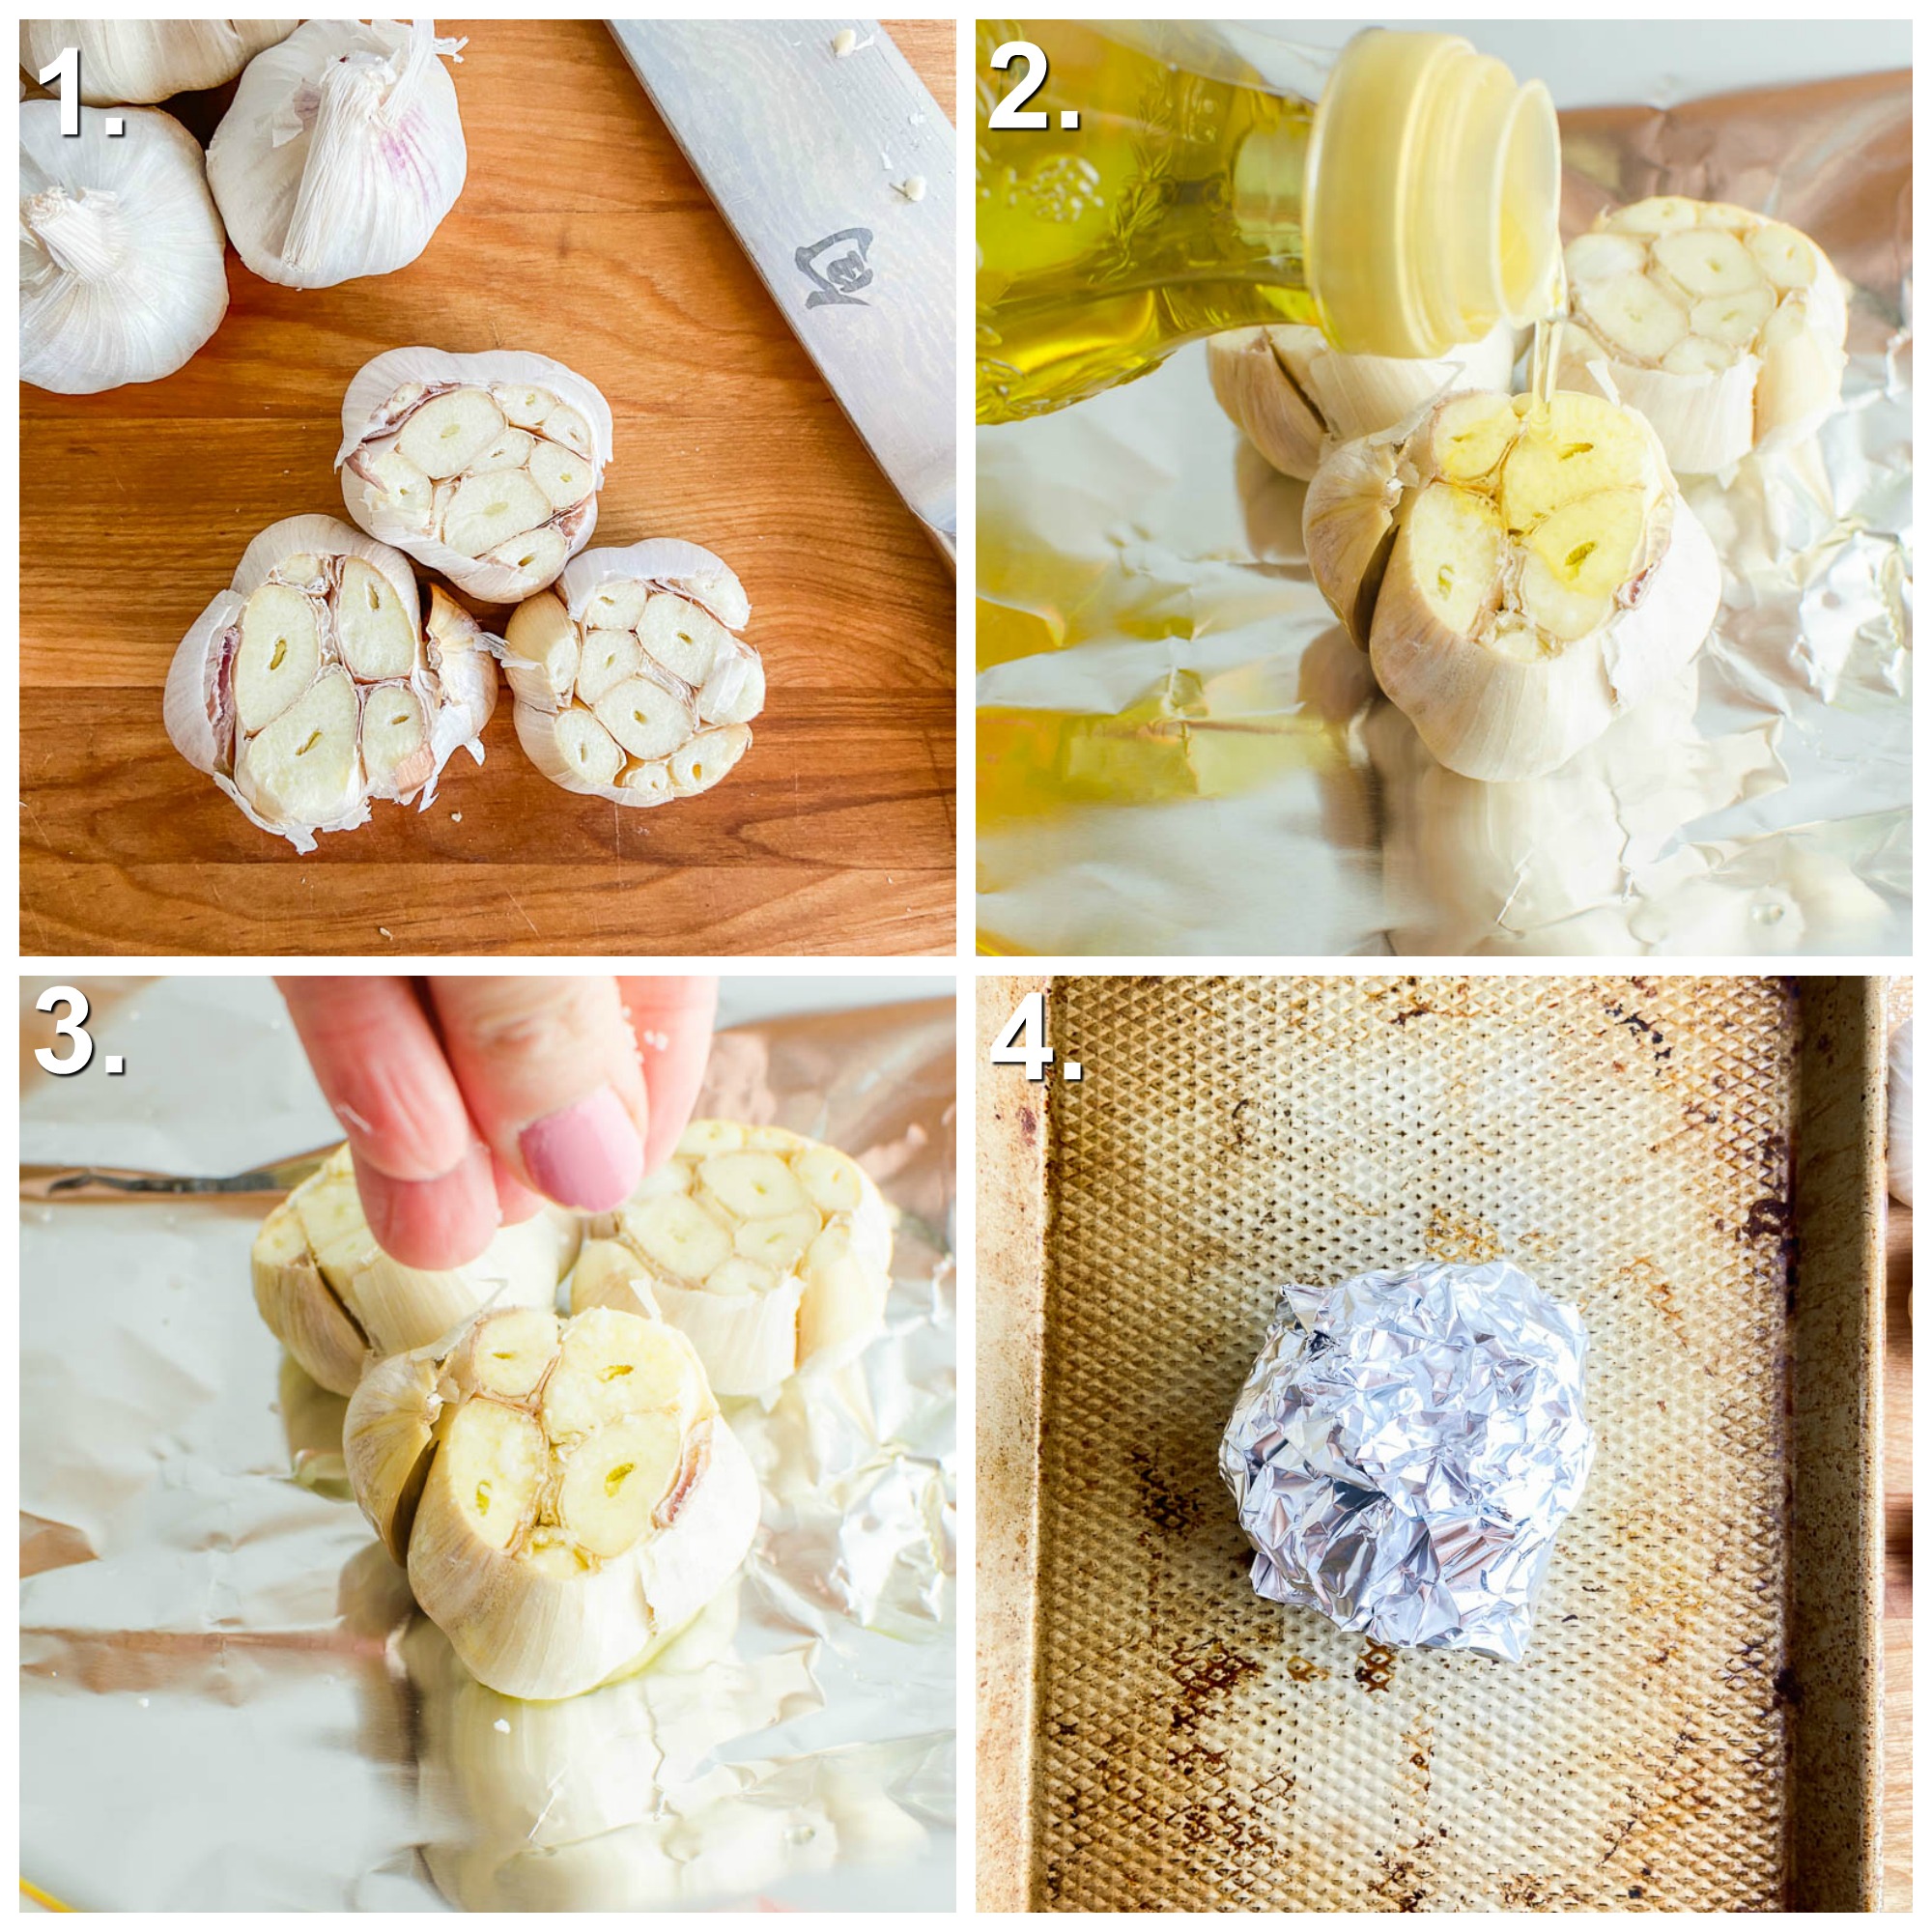 Step by Step Photos for how to roast garlic.